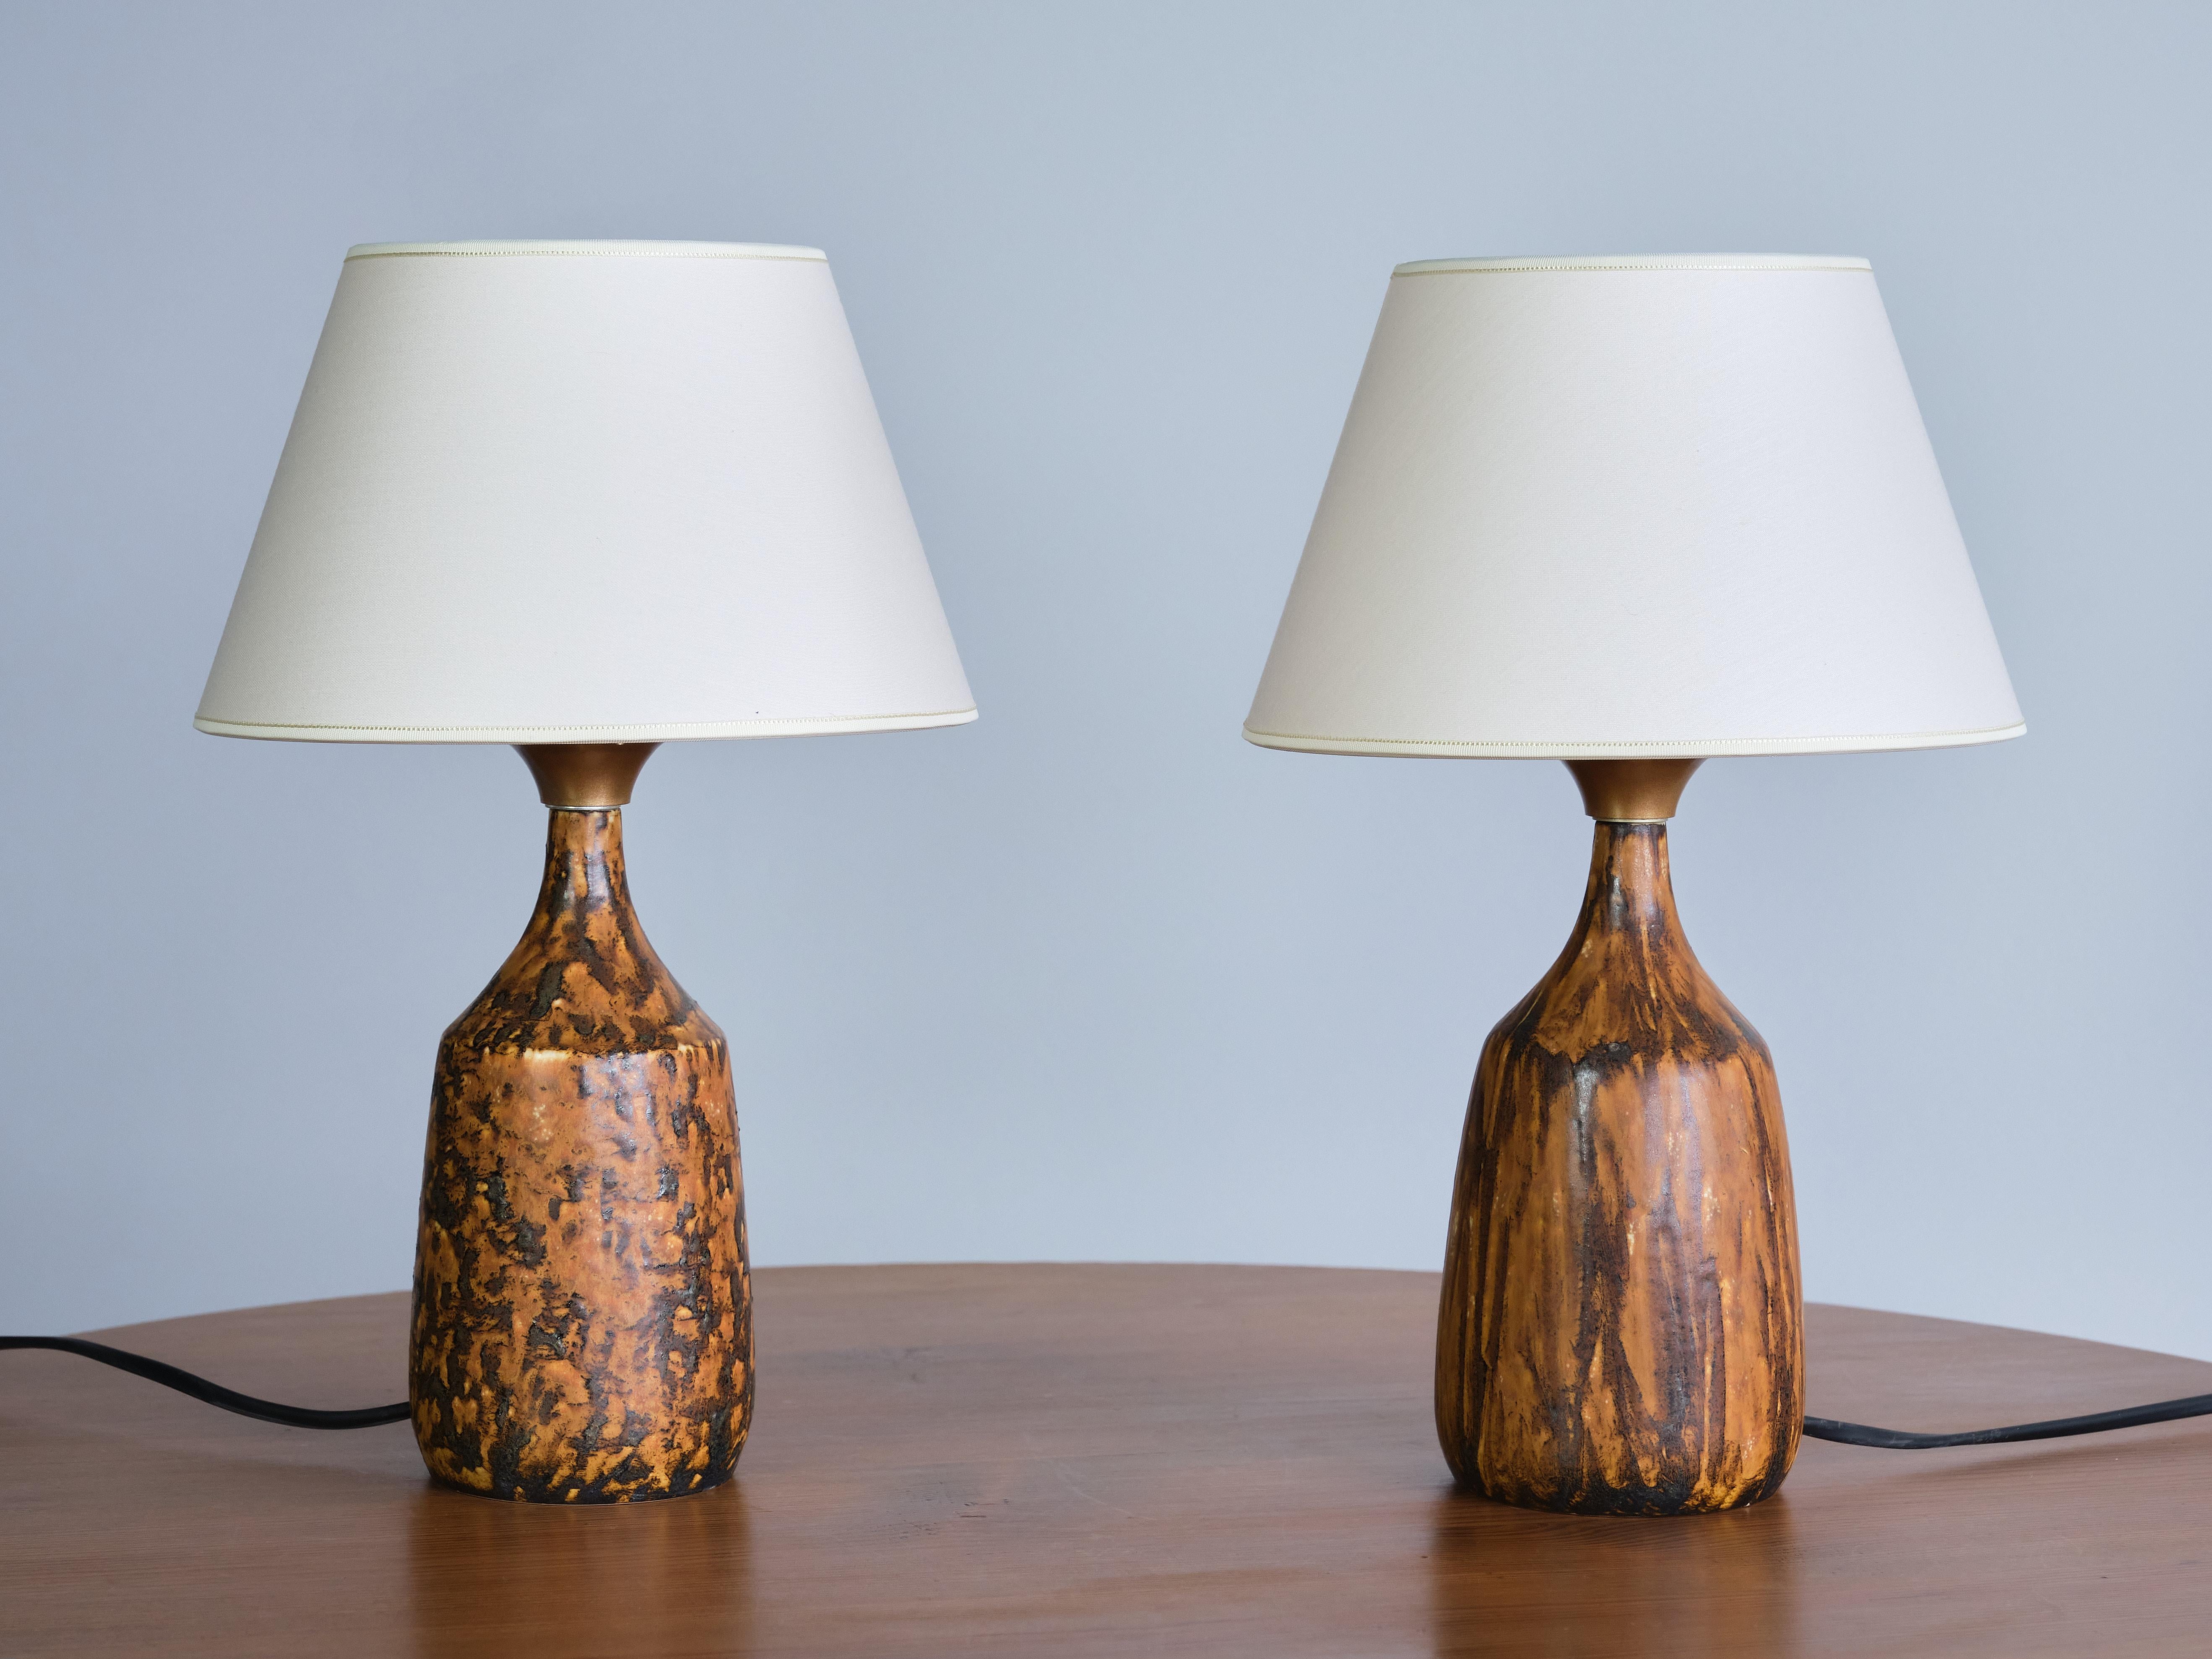 This rare pair of table lamps was designed by Gunnar Borg and produced by his own ceramic workshop 'Gunnars Keramik' in Höganäs, Sweden in the 1960s. The lamps are signed on the bottom of the base.  

The hand-turned stoneware base is made of